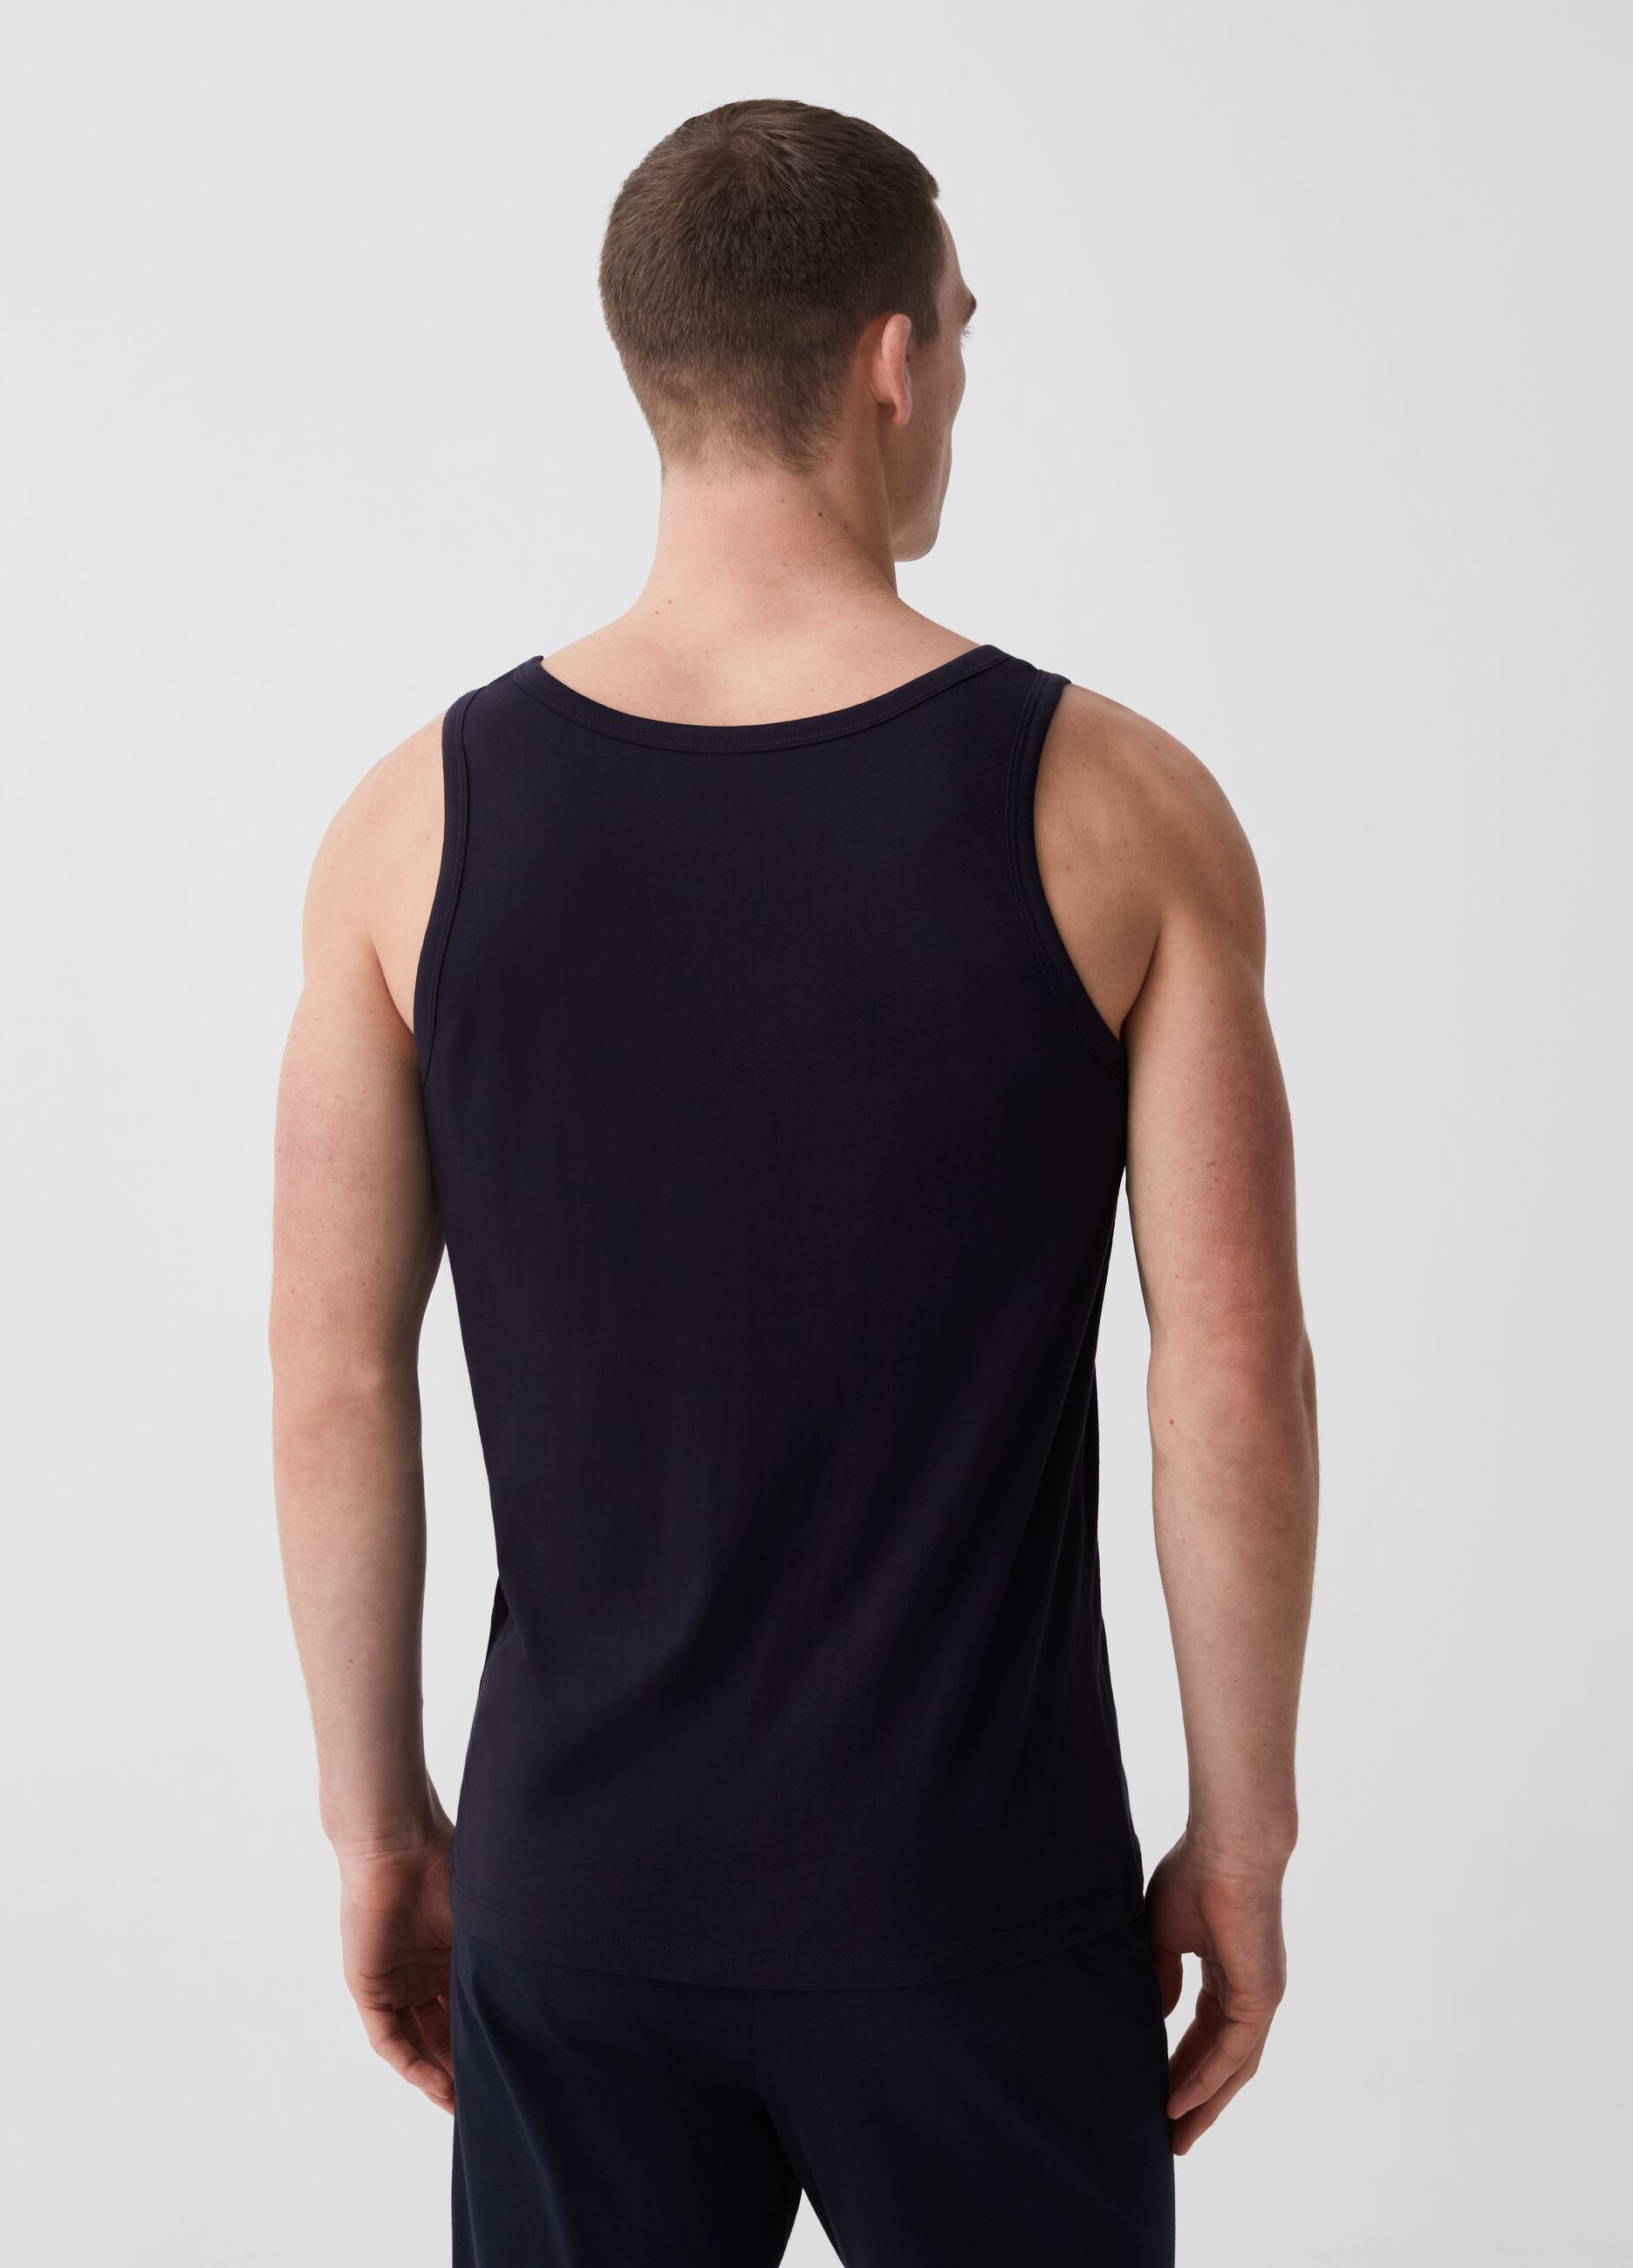 Racer back top with round neck